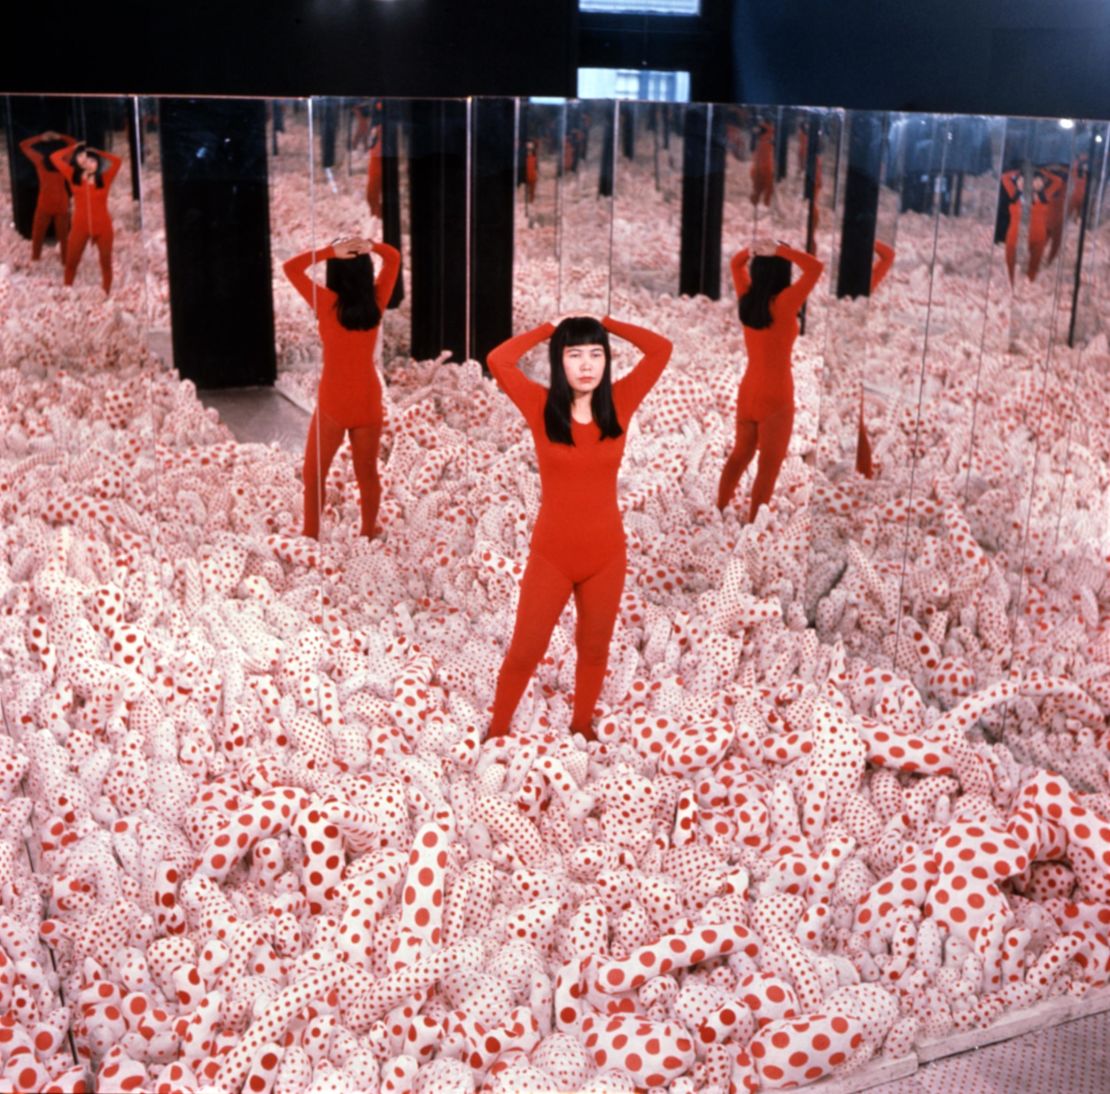 Yayoi Kusama at 90: How the 'undiscovered genius' became an